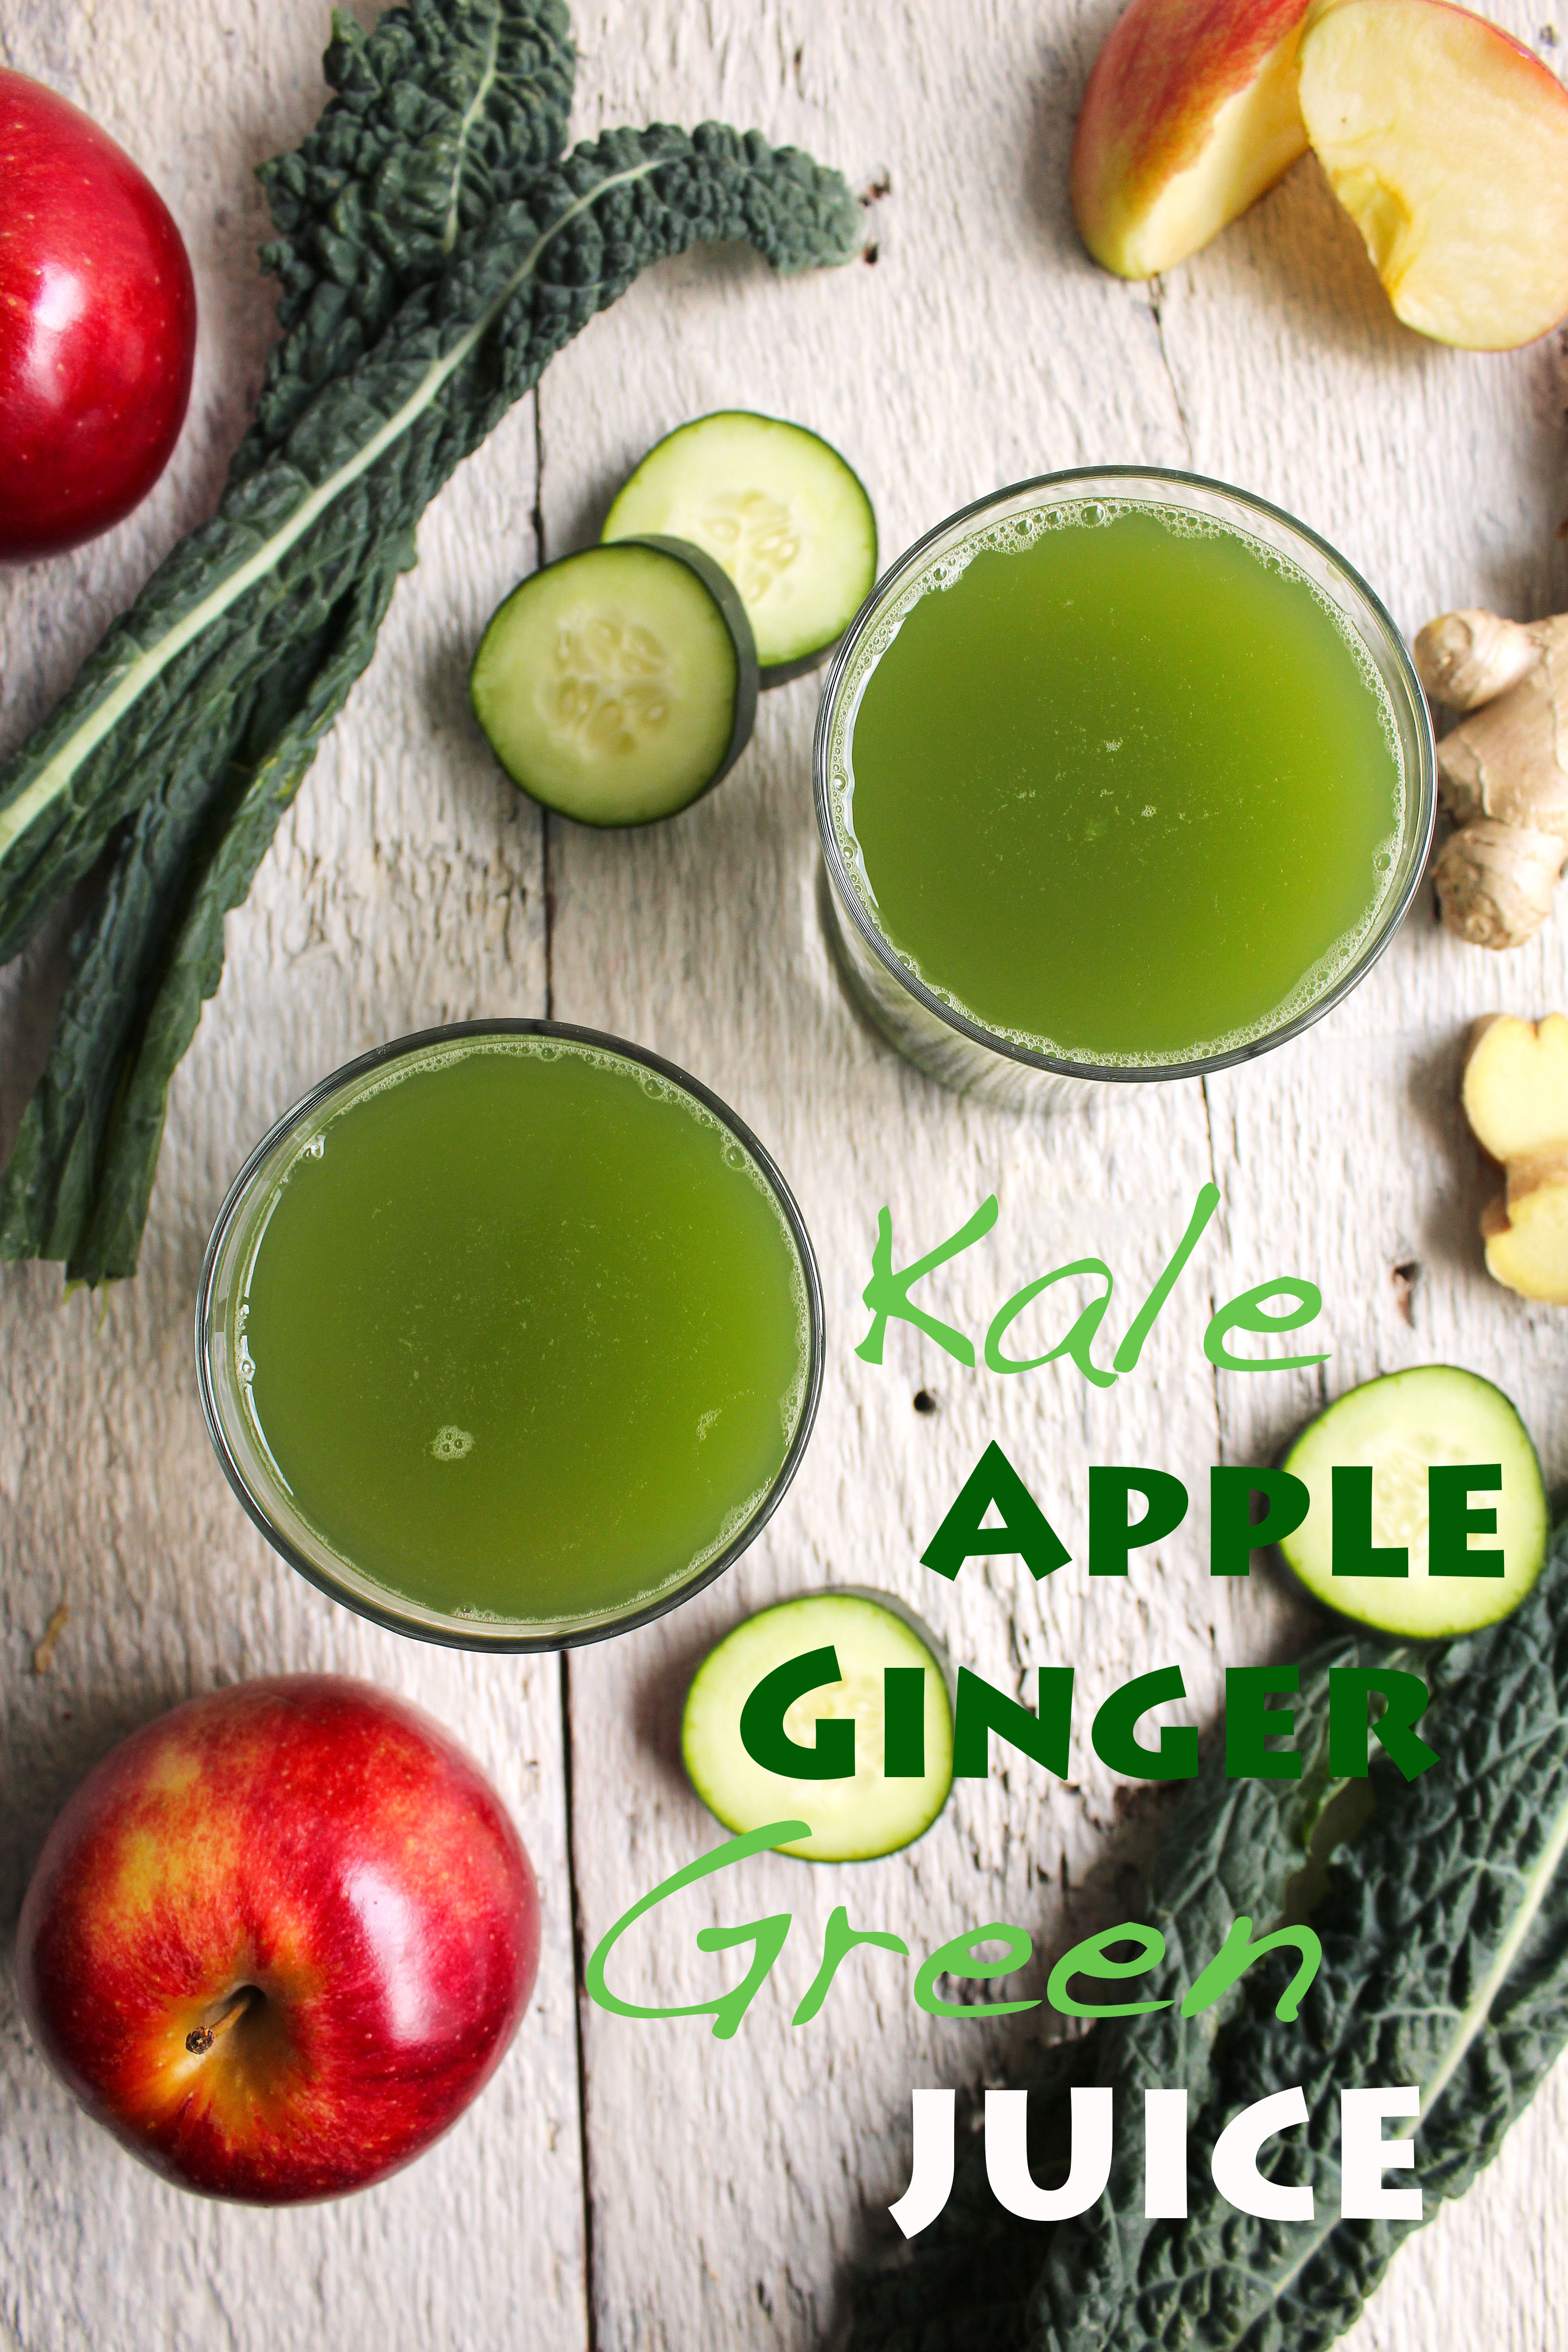 DELICIOUS Kale Apple Ginger Green Juice! Your new green juice recipe WITHOUT a juicer! Perfectly sweet + a spicy kick from ginger! YES! #vegan #glutenfree #recipe | peachandthecobbler.com